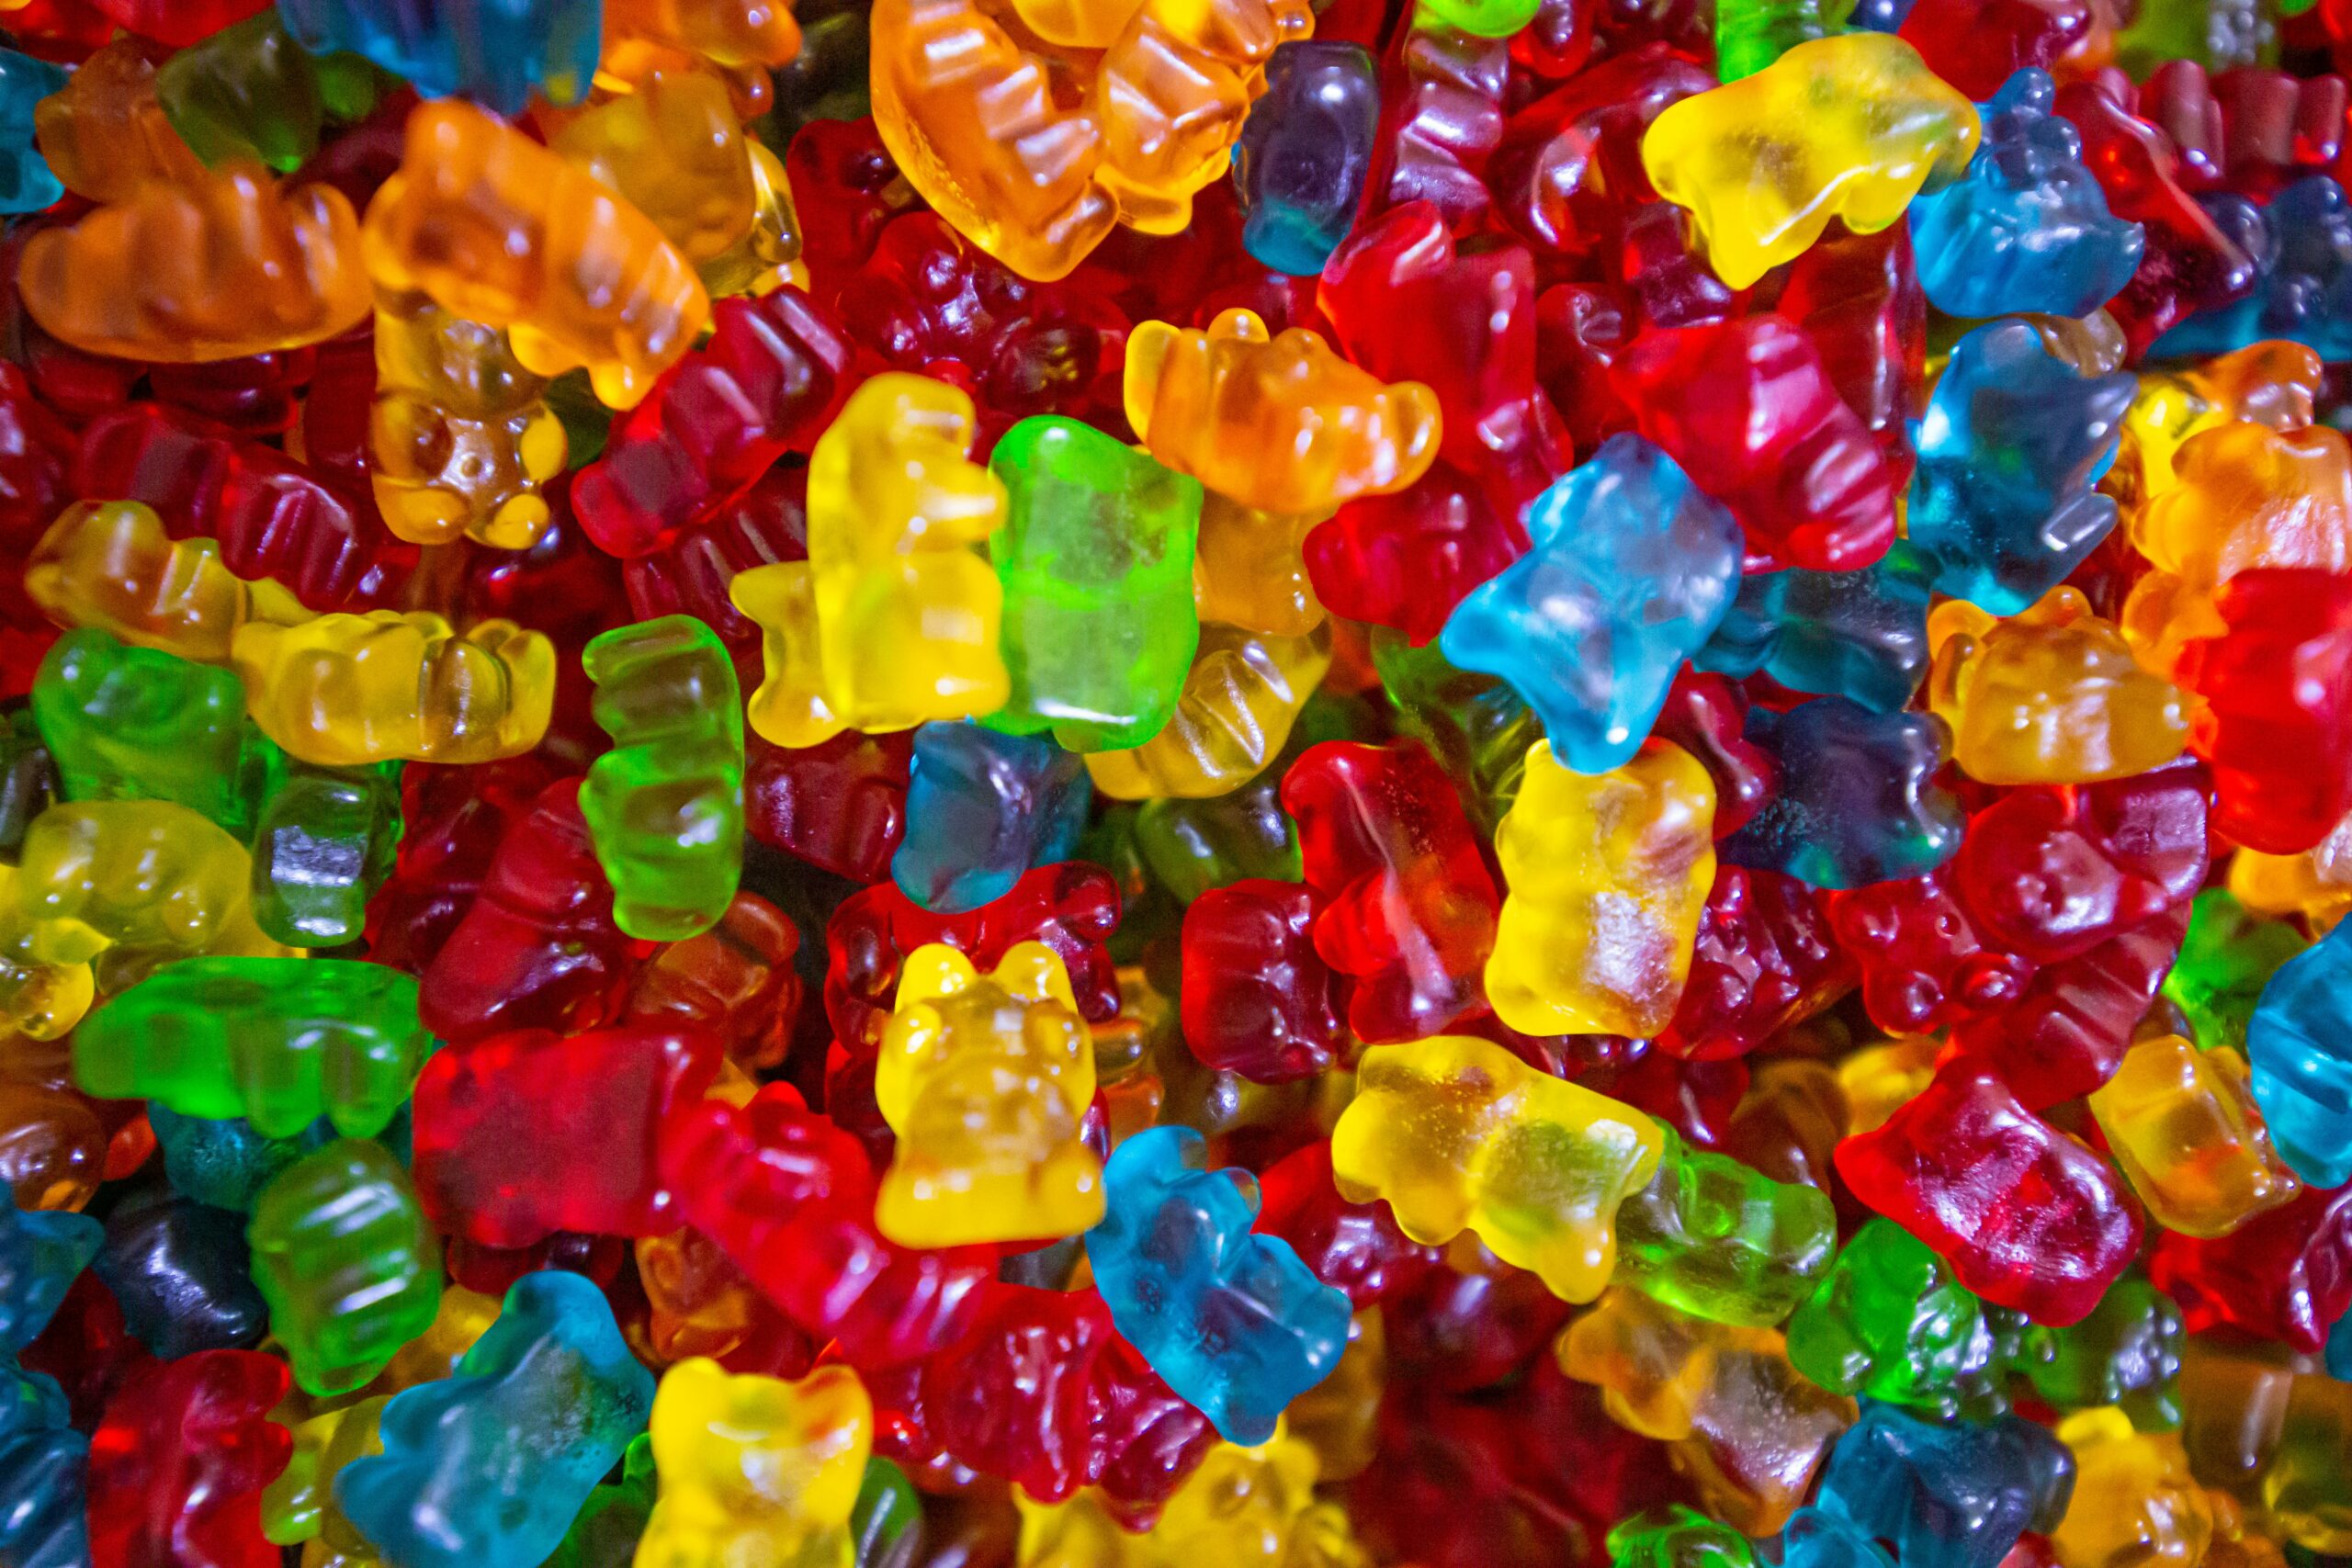 Best D9 Gummies: Components As Well As Quality